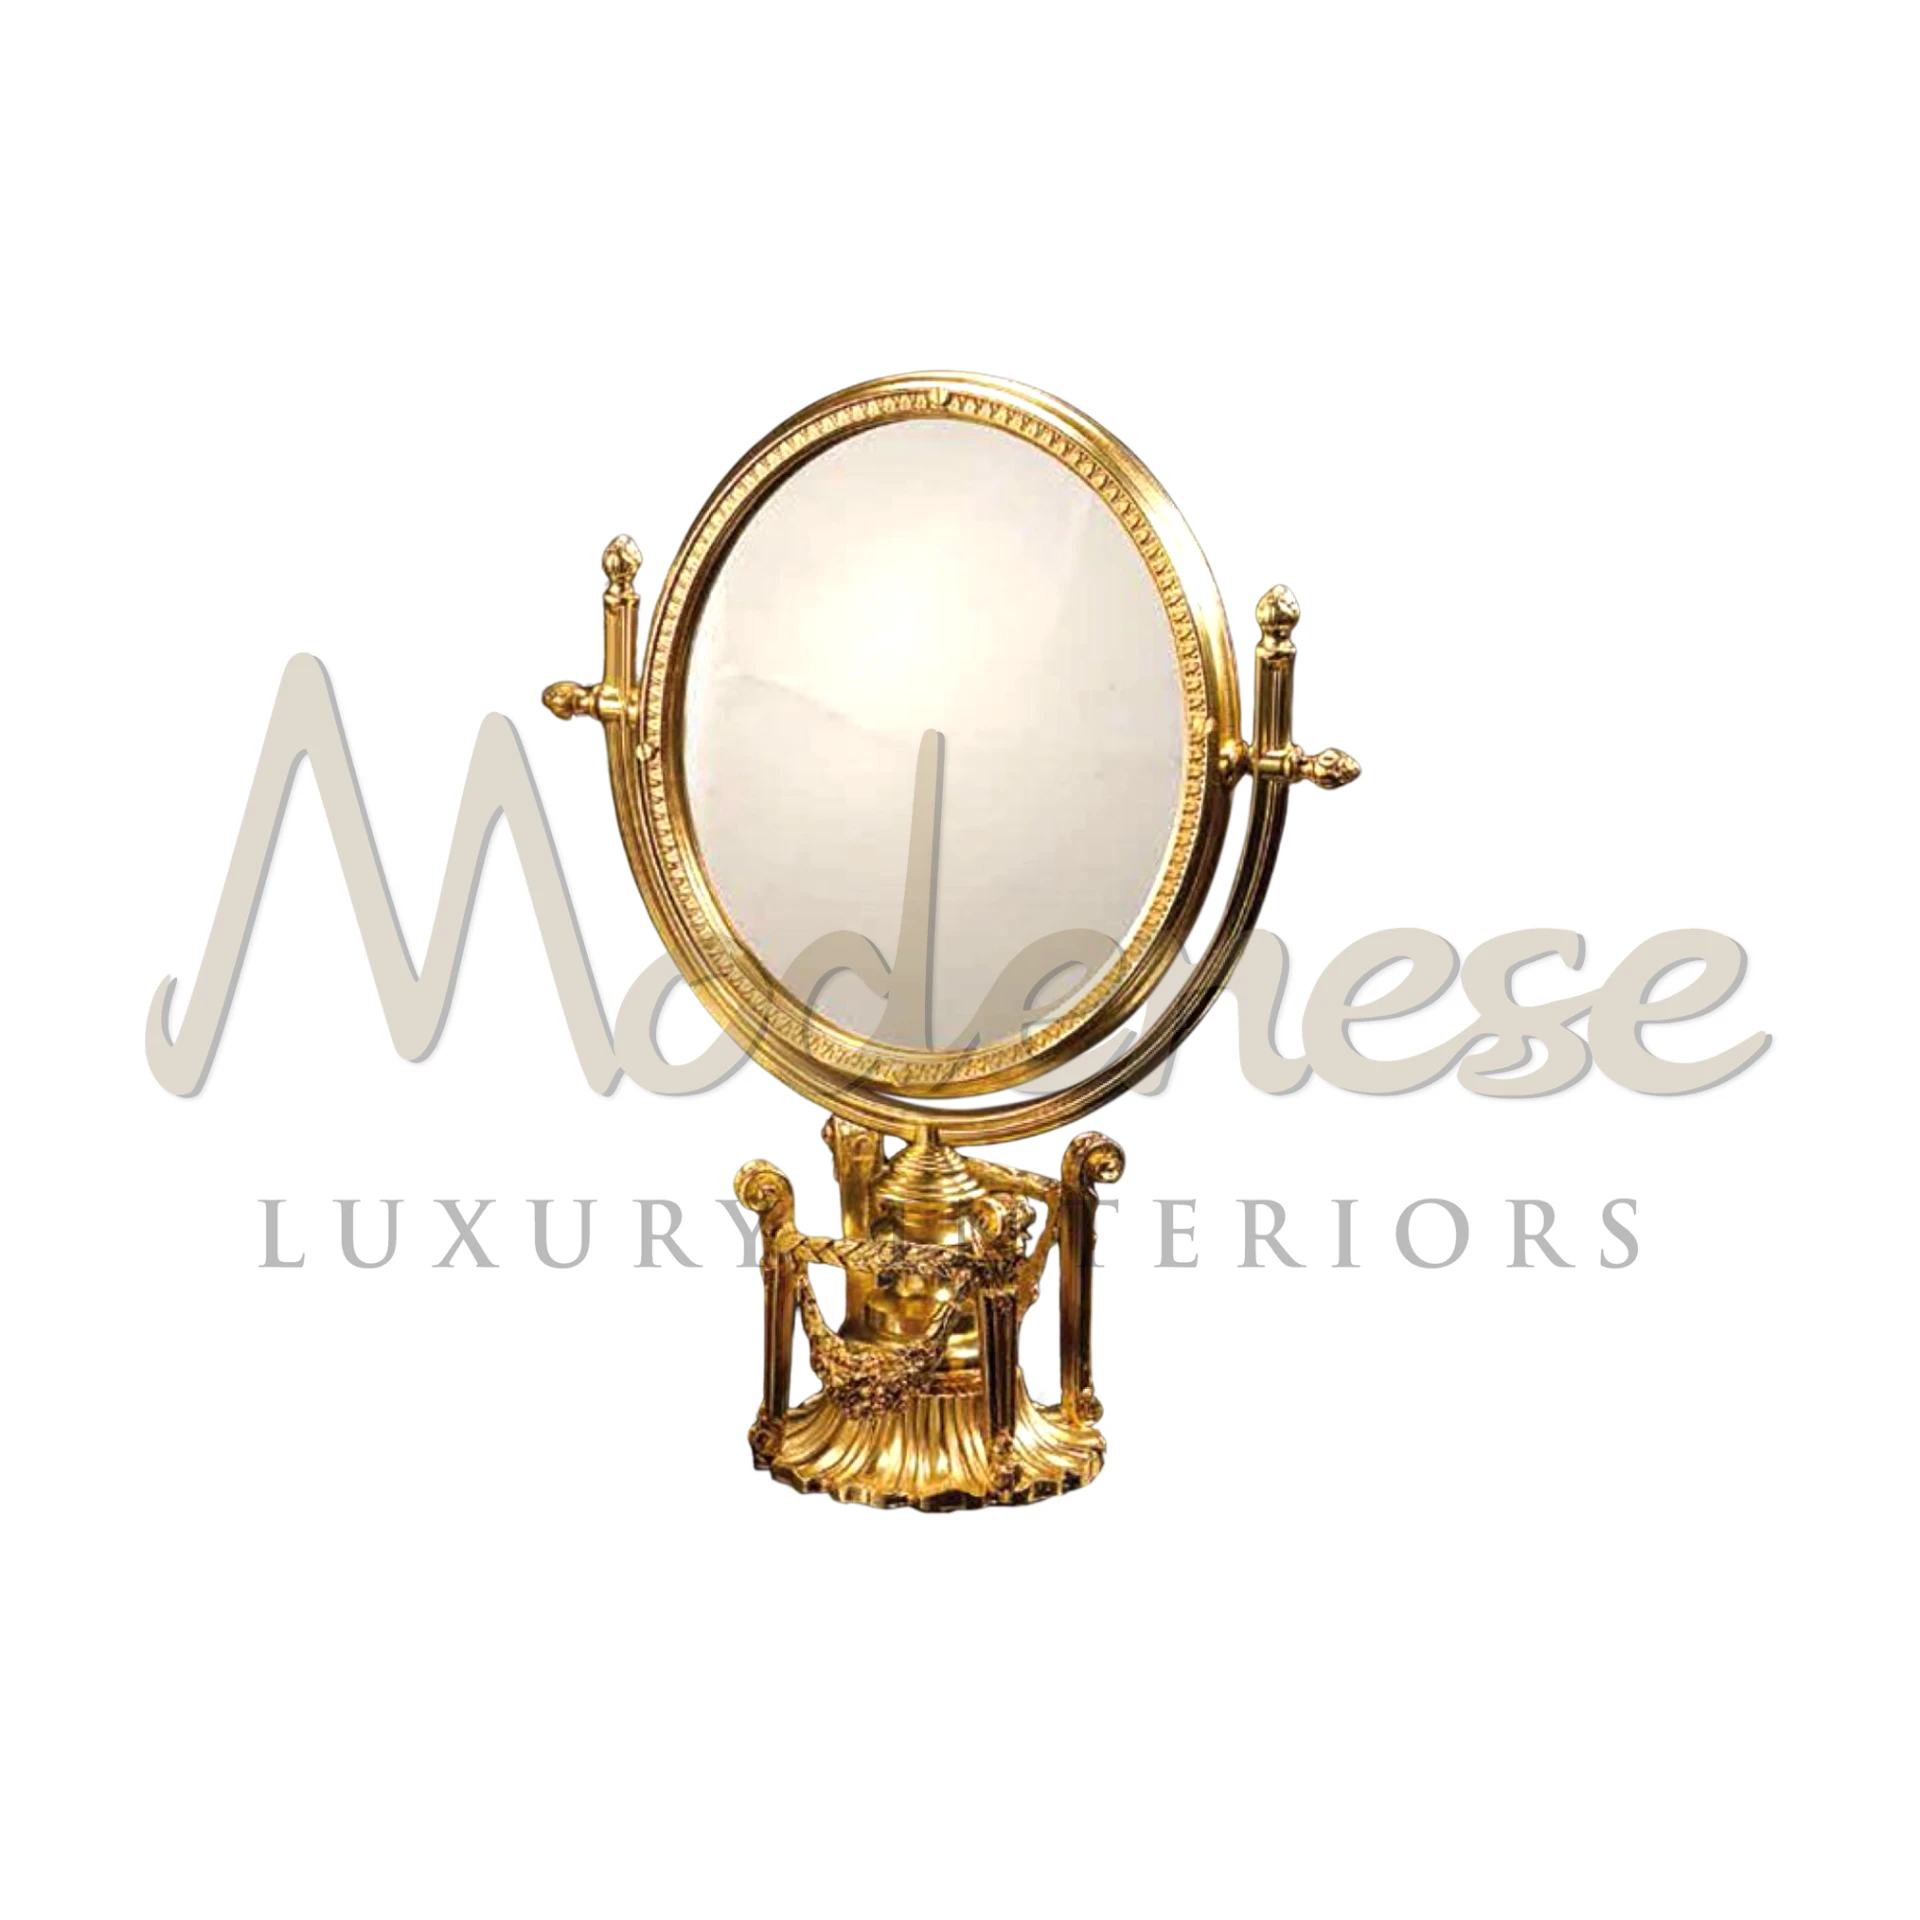 Imperial Mirror featuring a grand, ornate frame in gold or silver, reflecting a lavish sense of grandeur, perfect for sophisticated interior design.